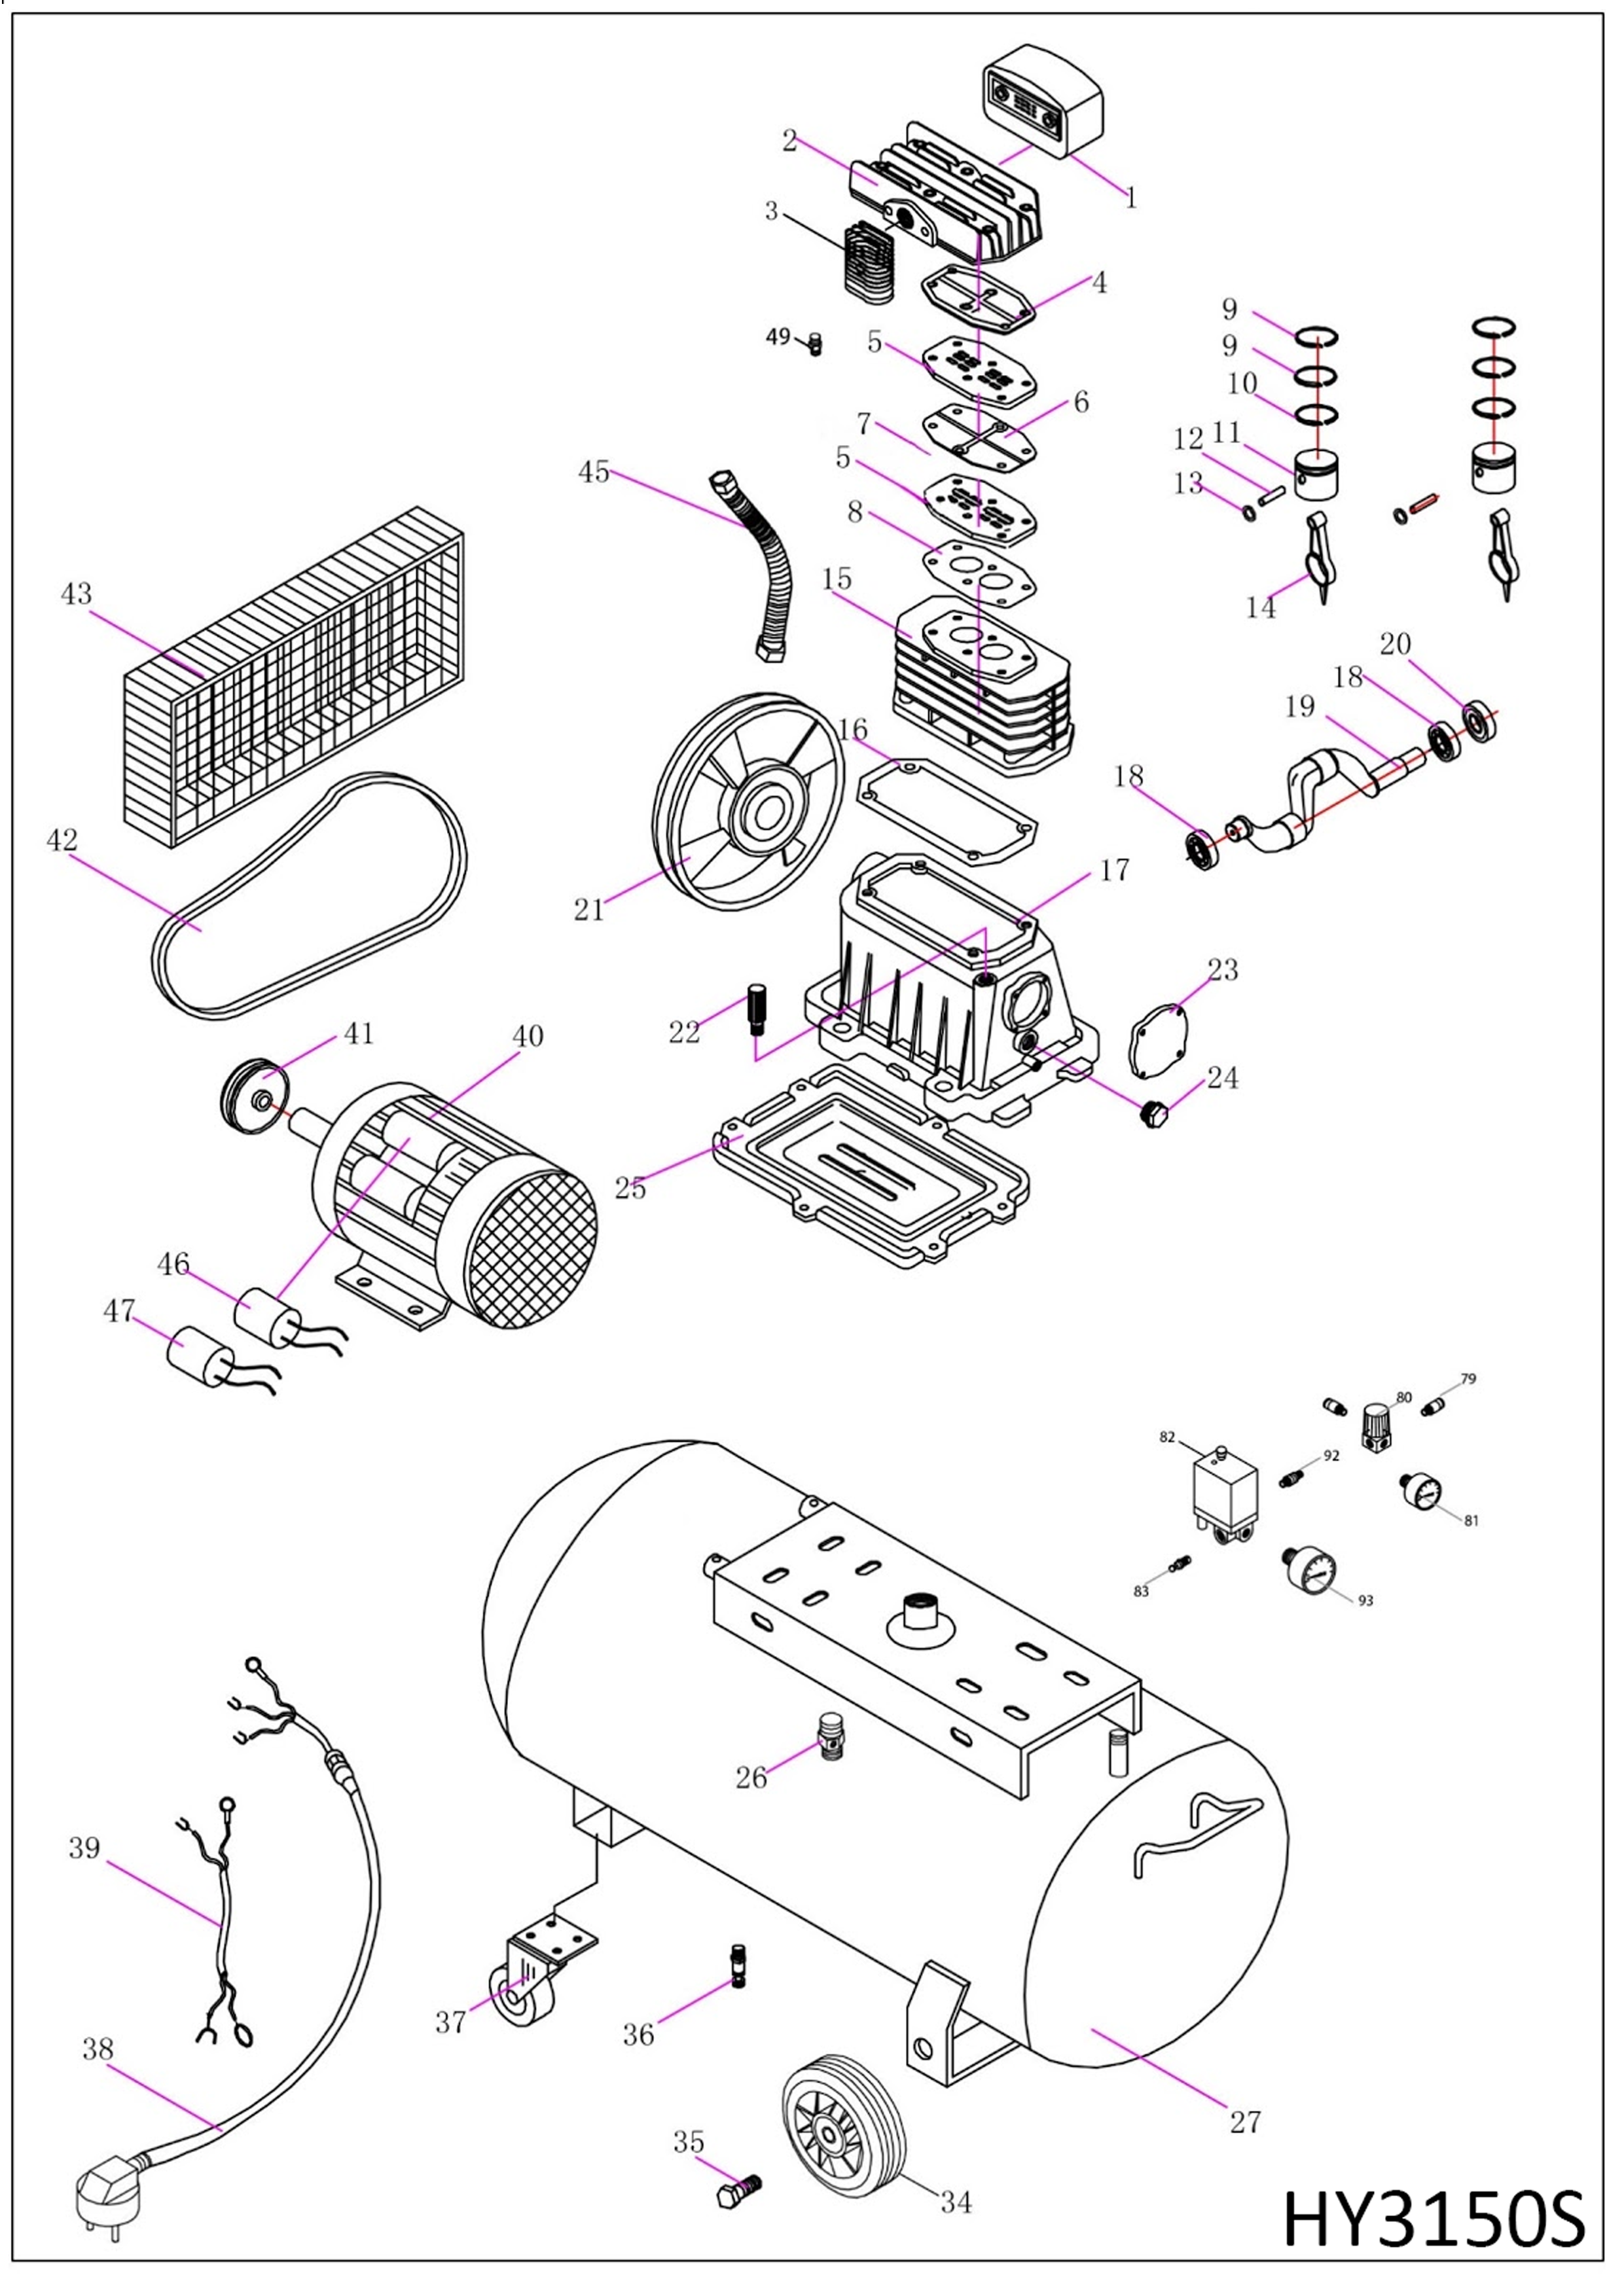 Exploded View of the HY3200S Belt Driven Air Compressor